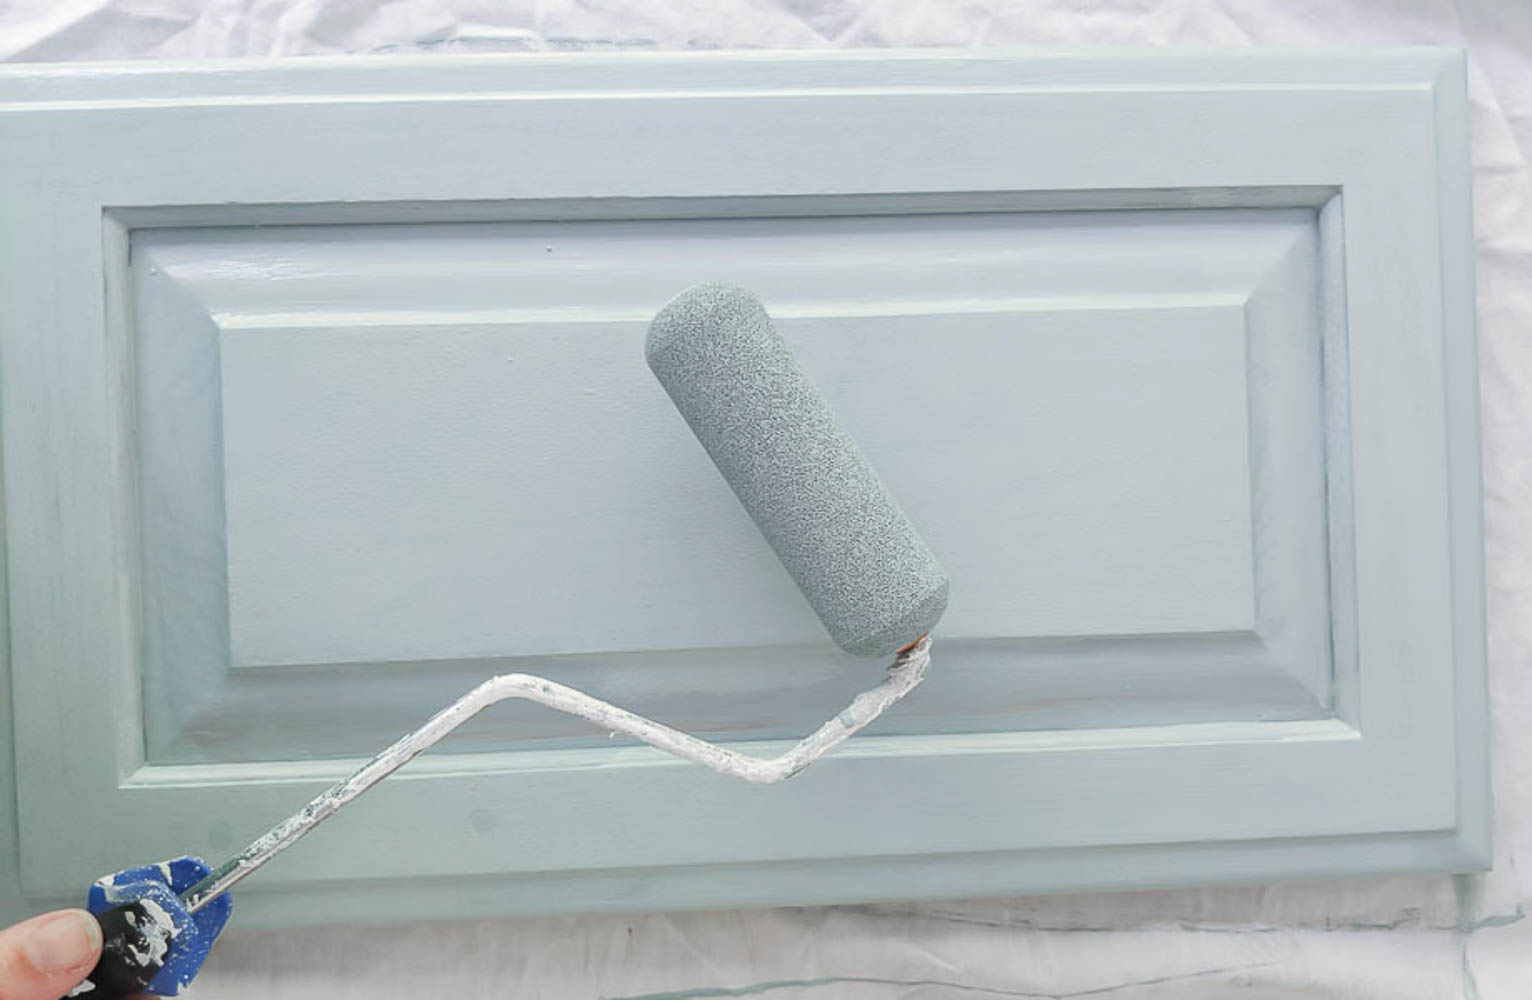 painting a cabinet door with a foam paint roller and blue paint.